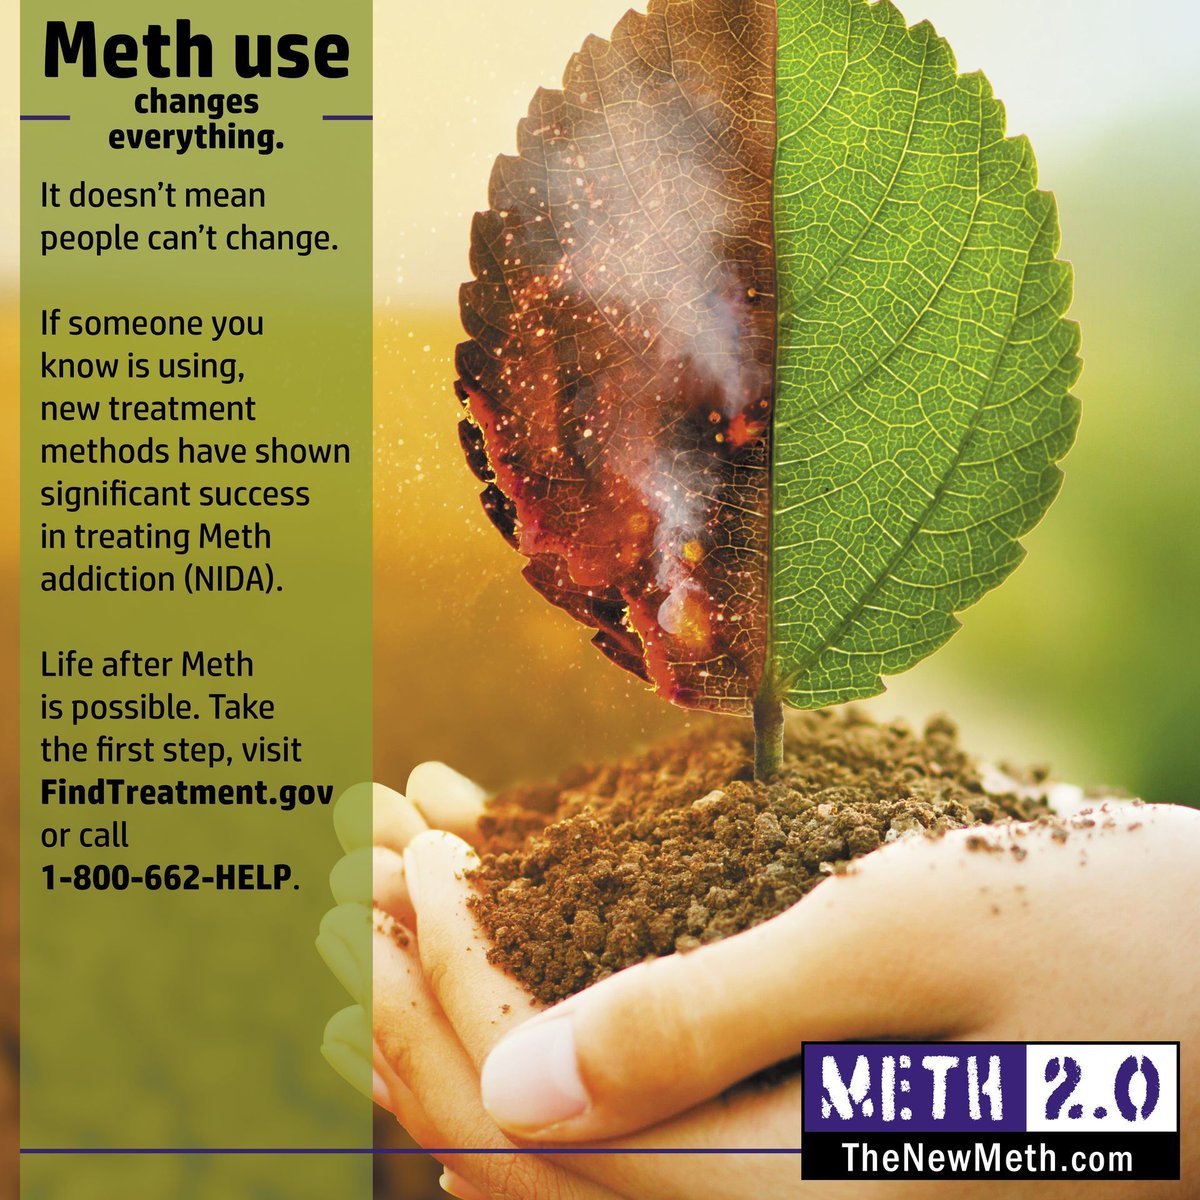 Do you know how to spot the warning signs of meth use?
➡️ Weight loss
➡️ Abnormal sweating
➡️ Shortness of breath
➡️ Sores that do not heal
➡️ Sleeplessness
➡️ Irritability

 thenewmeth.com

#standupaj #prevention #drugawareness #drugfreeyouth #addiction